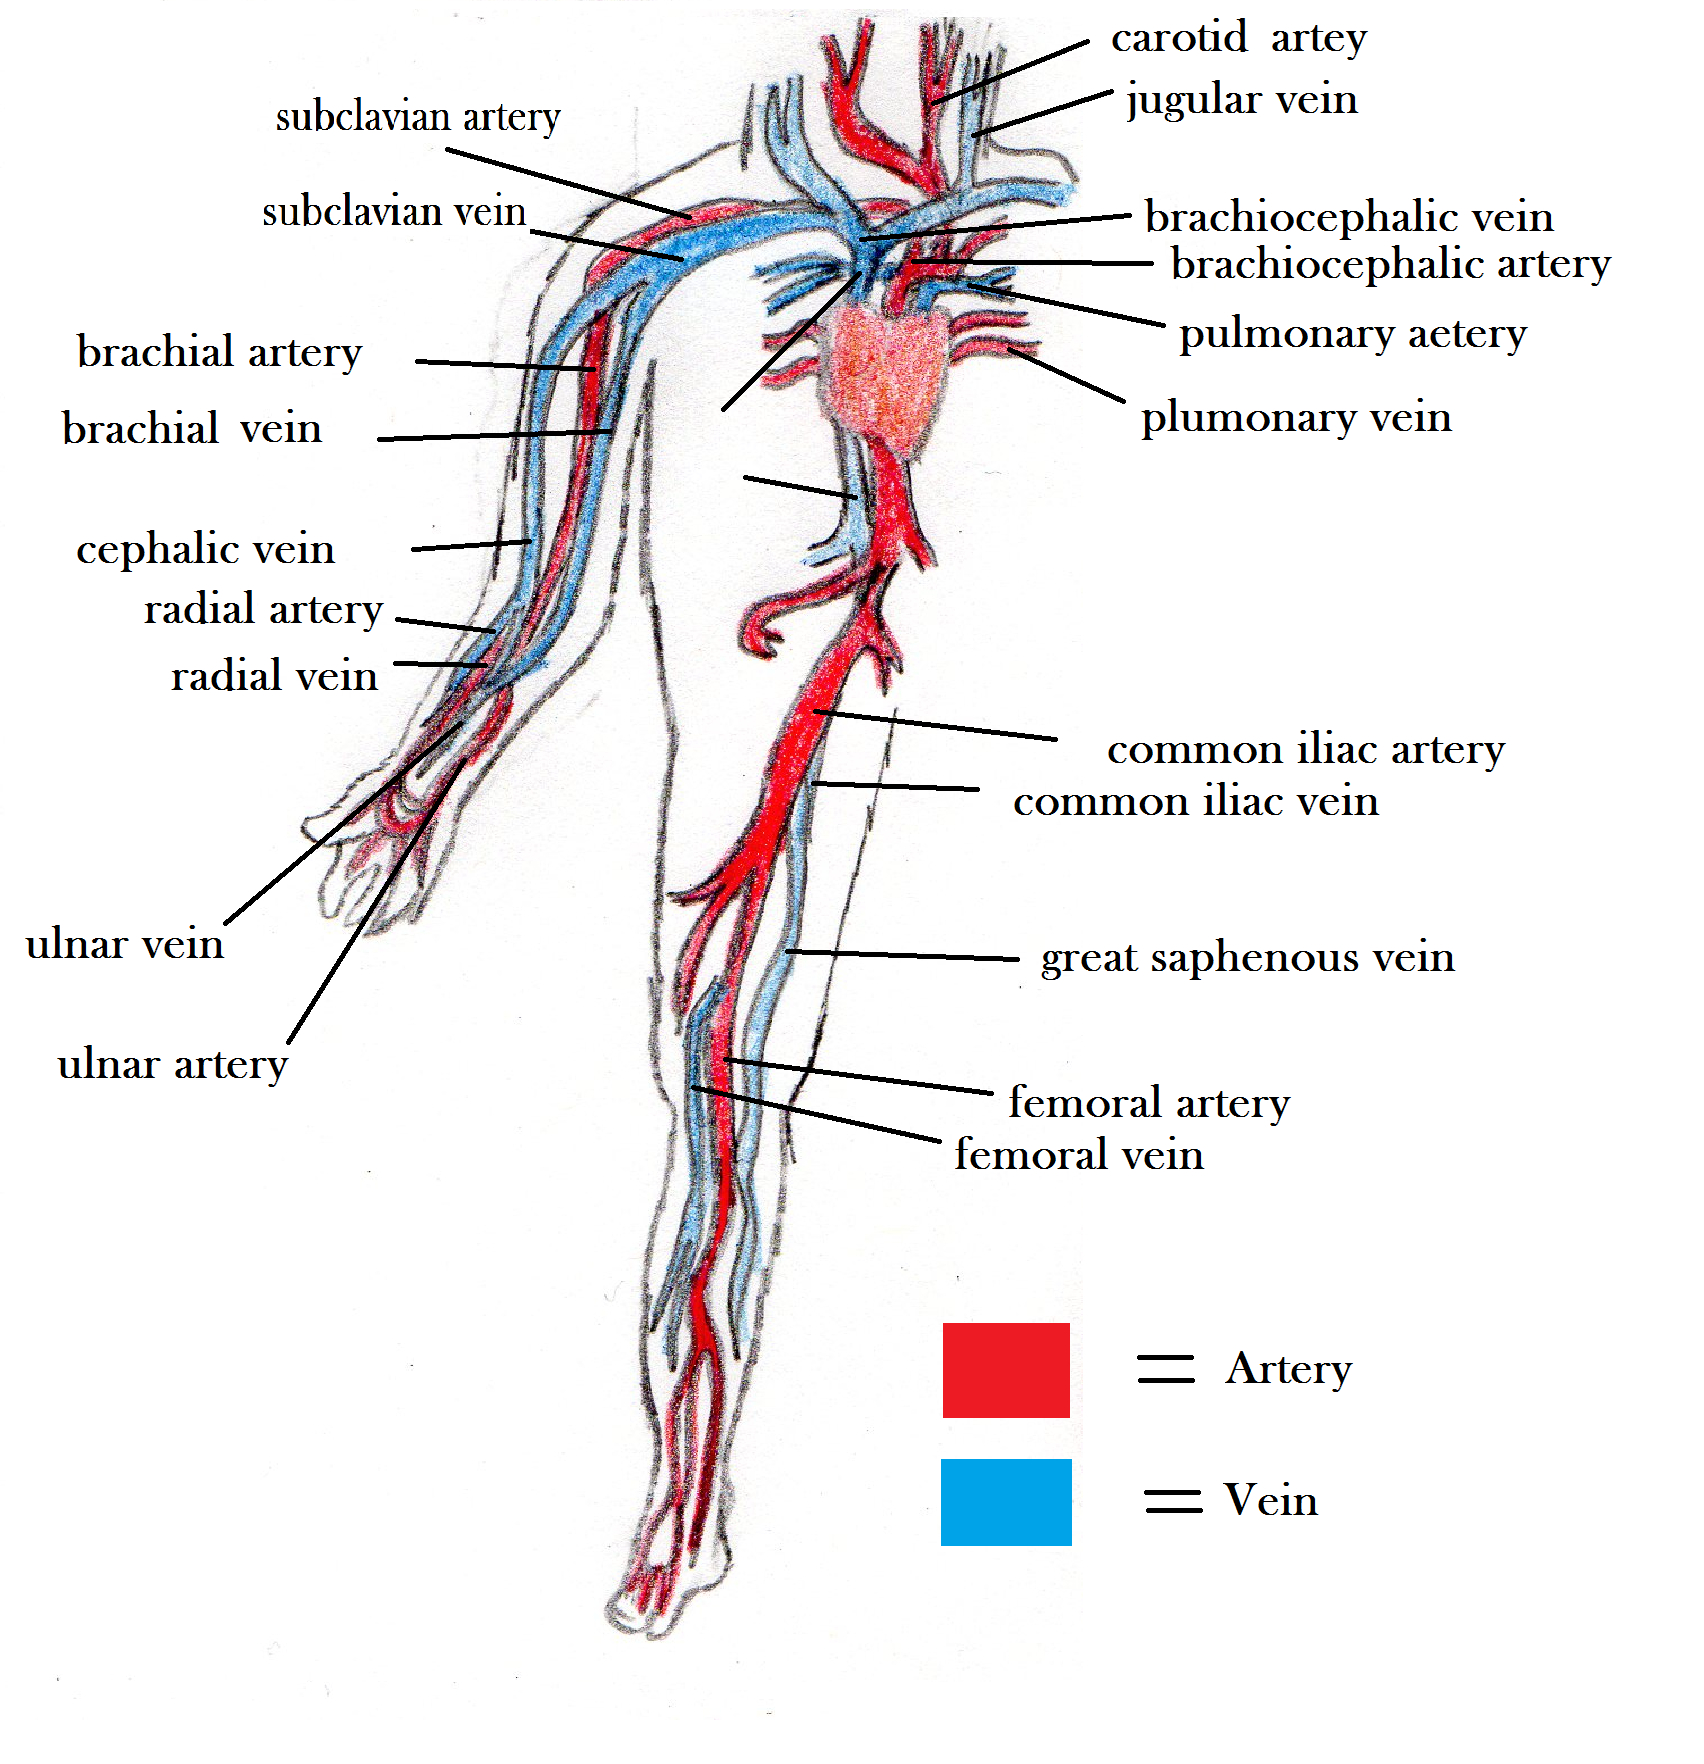 Arteries And Veins Diagram Arteries And Veins Blood Vessel Diagram The Circulatory System